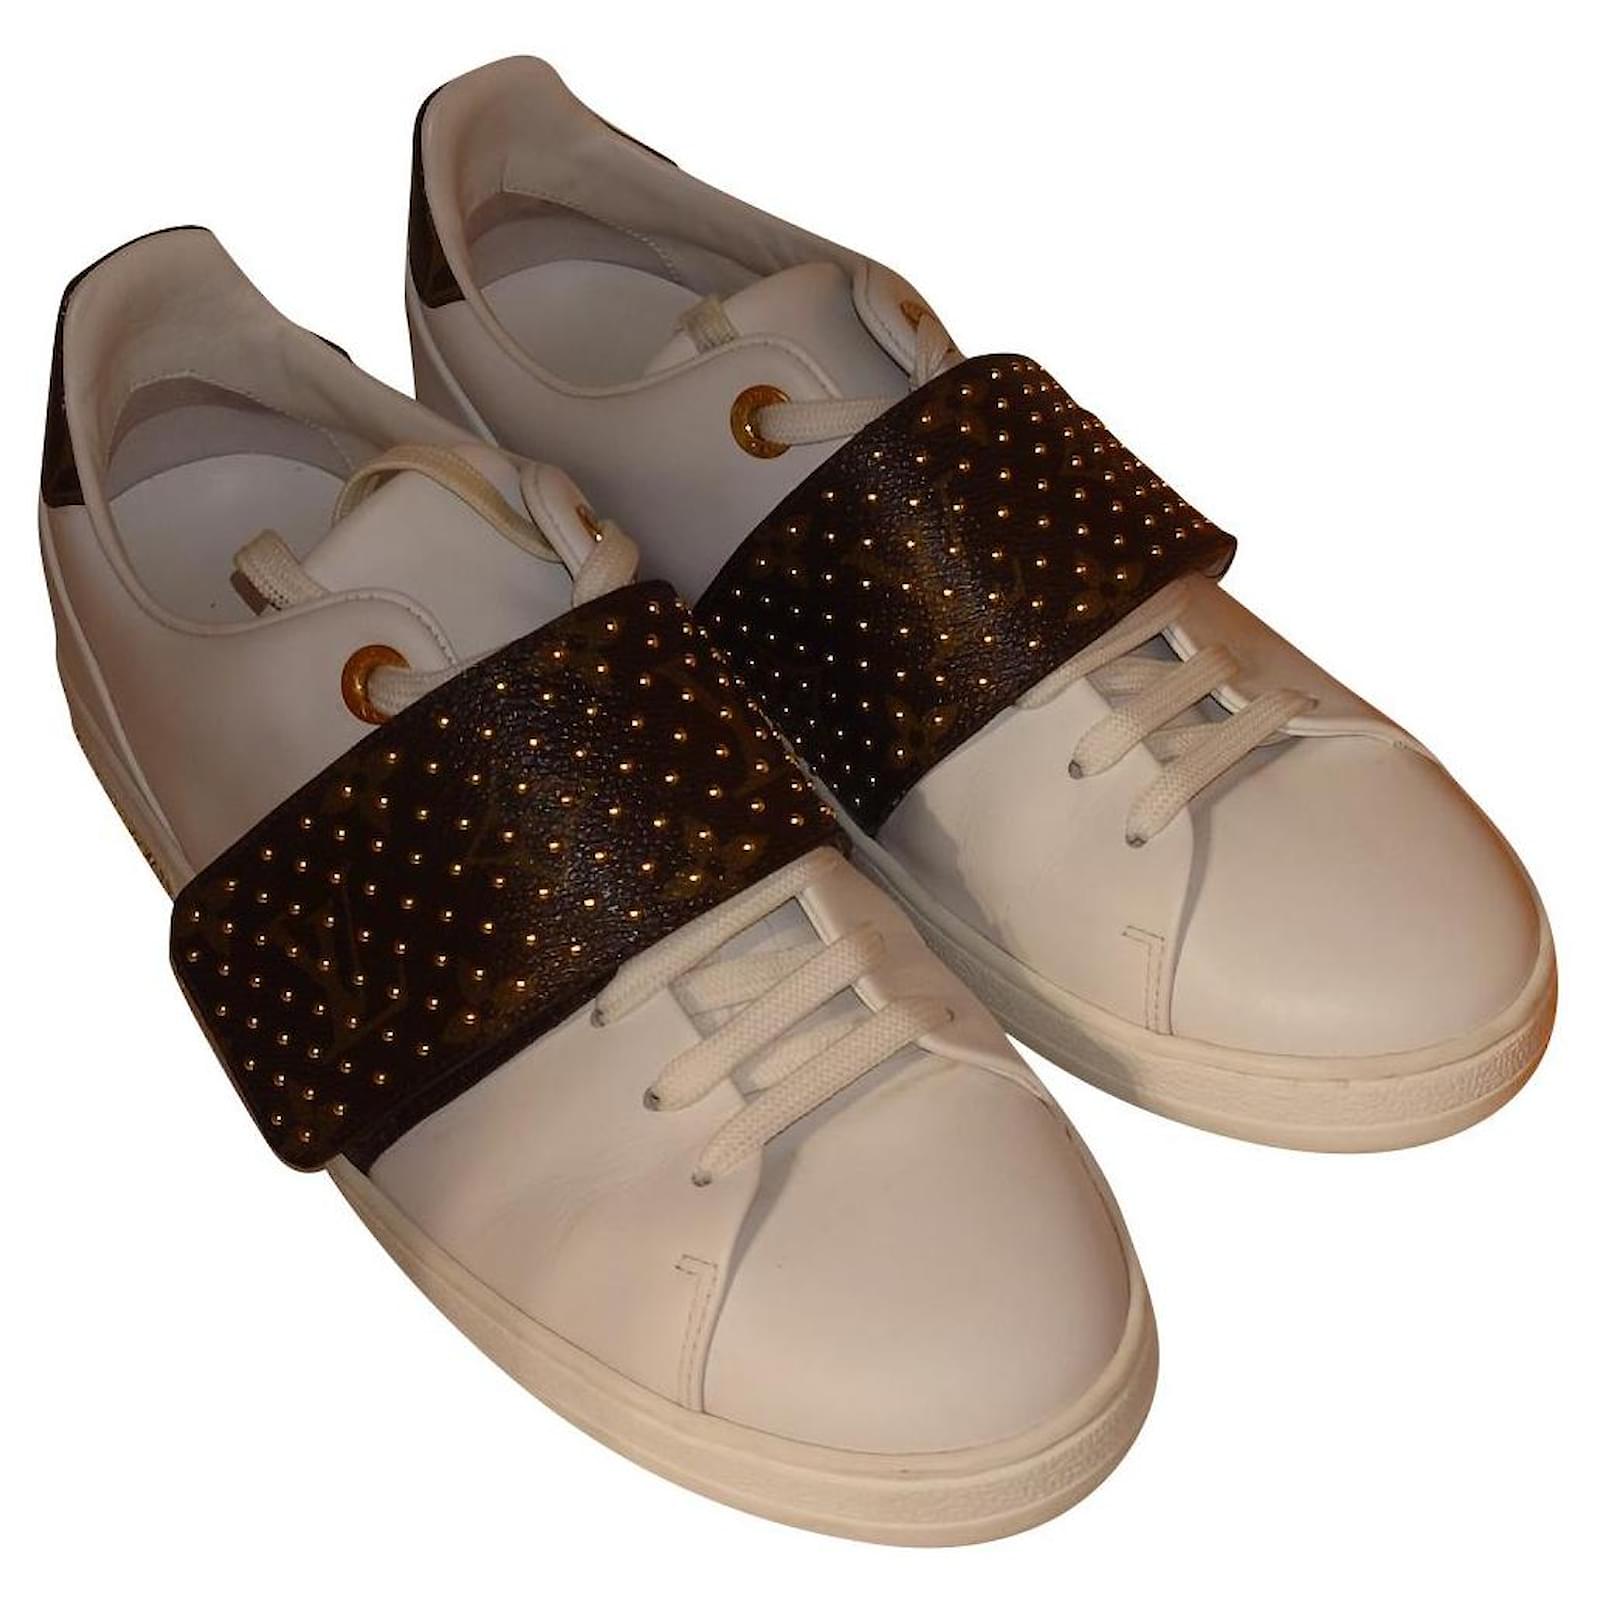 Sneakers Louis Vuitton Louis Vuitton FRONTROW White/Brown Studded Leather Sneaker 37.5 US 7.5